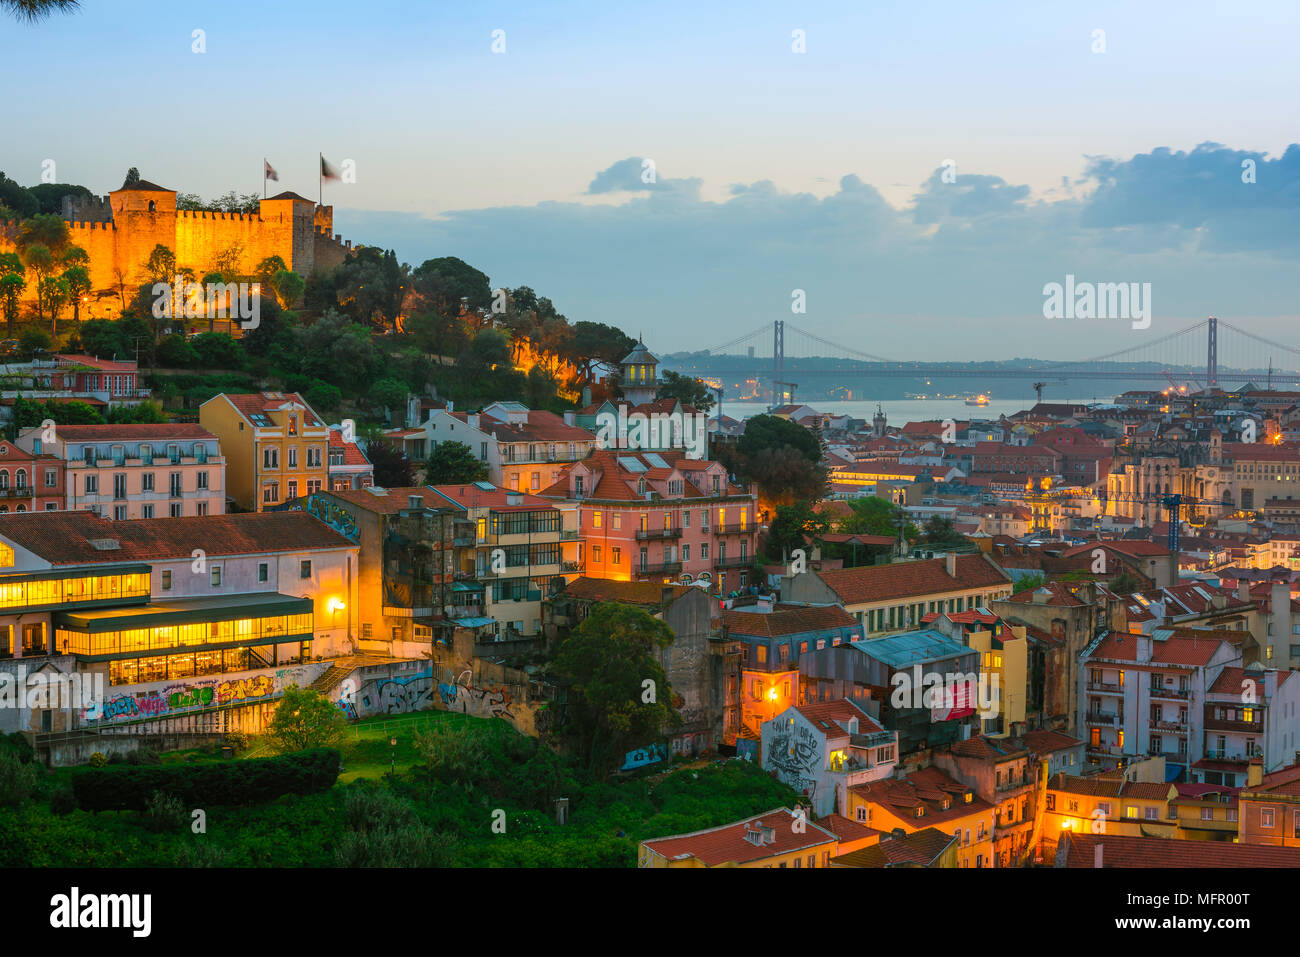 Lisbon skyline, view across the rooftops of the Mouraria in the center of Lisbon towards the River Tagus and the Ponte 25 de Abril bridge, Portugal. Stock Photo